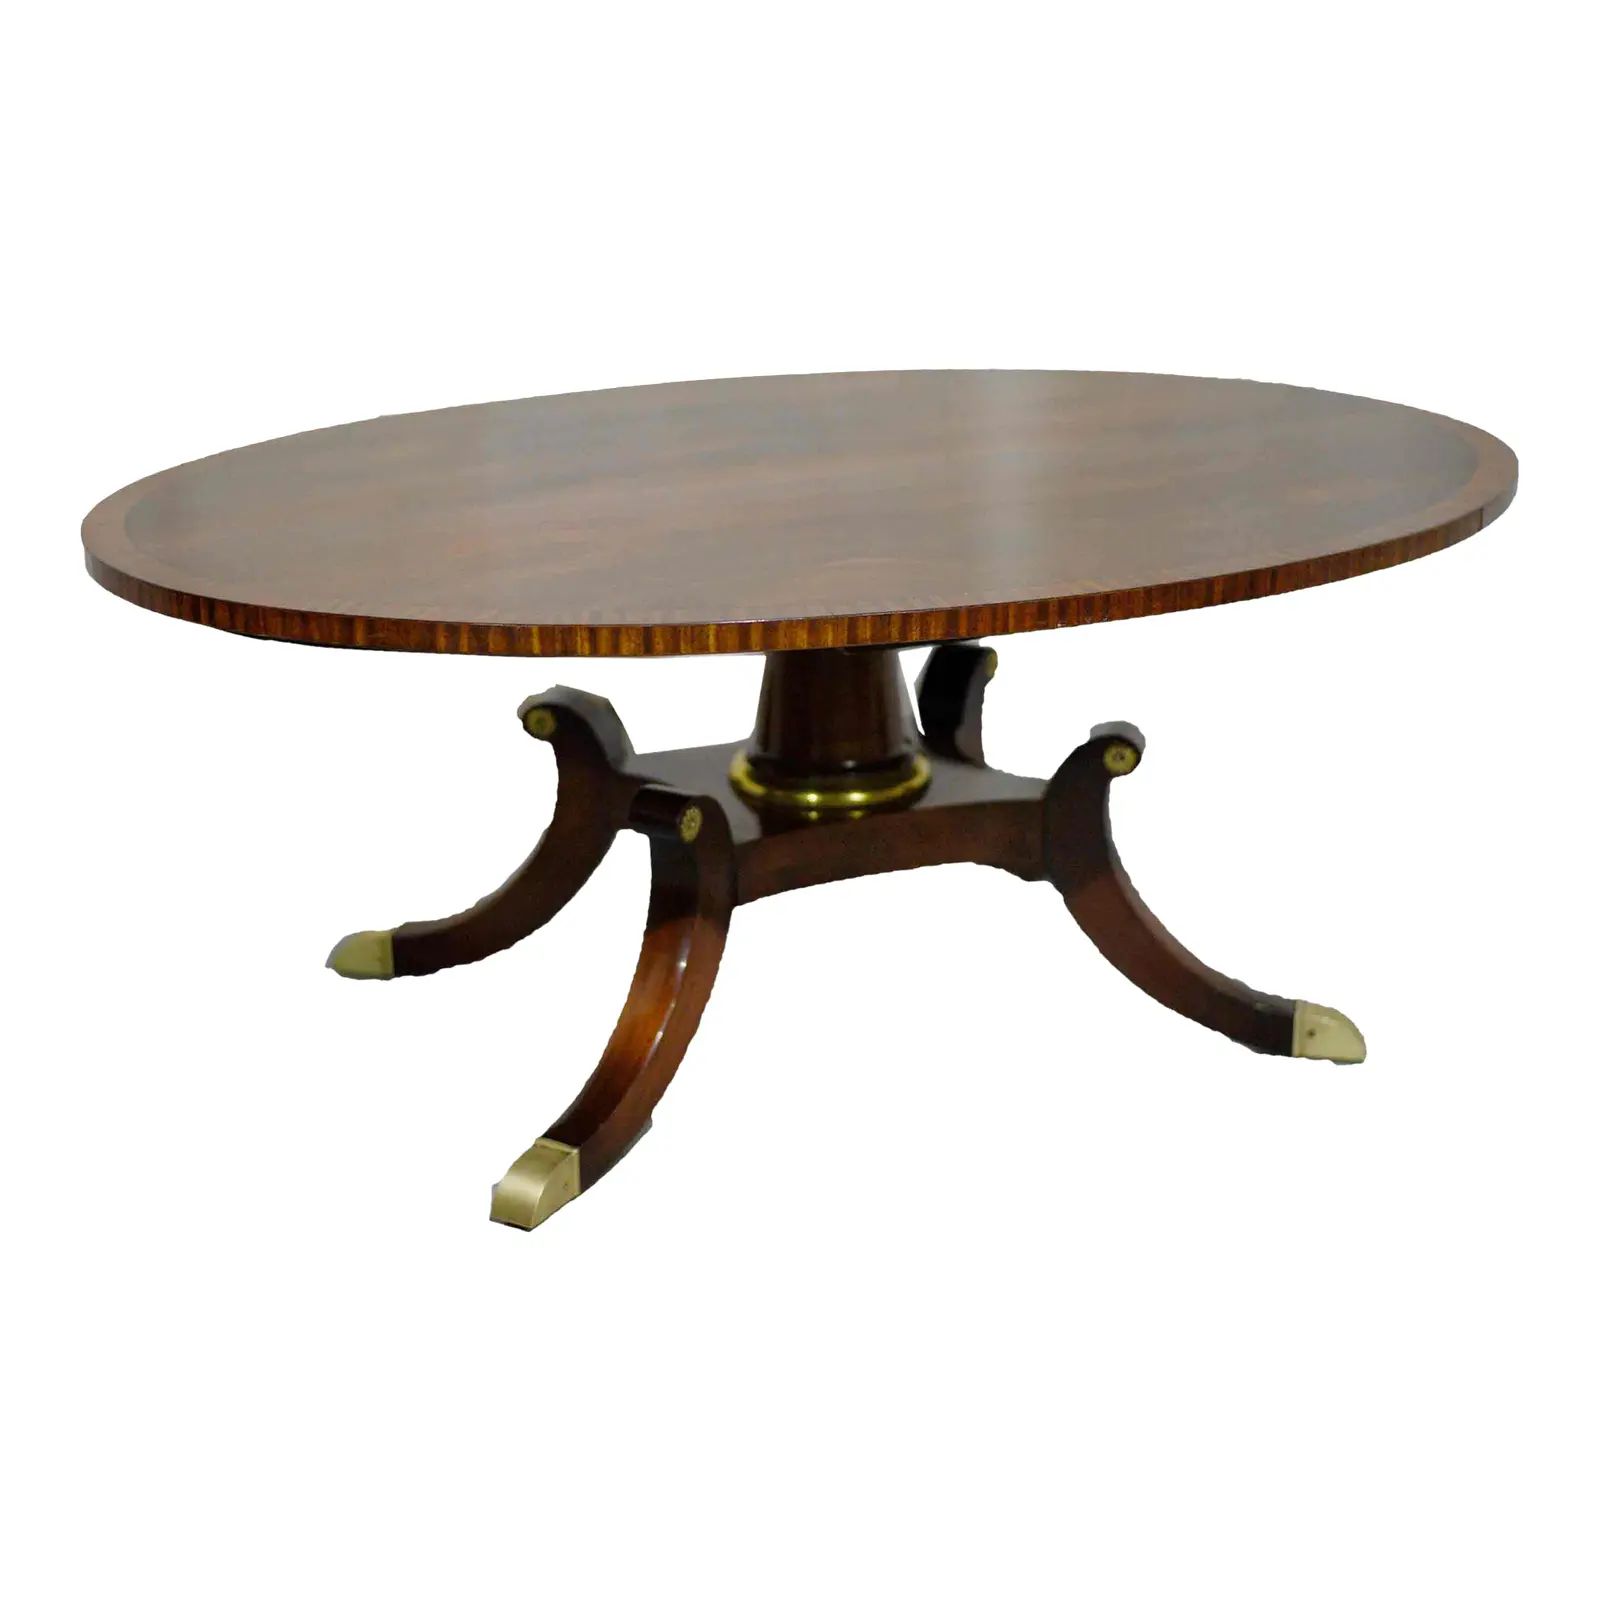 1950s Traditional Banded Mahogany Oval Pedestal Coffee Table by Charak Furniture Boston | Chairish